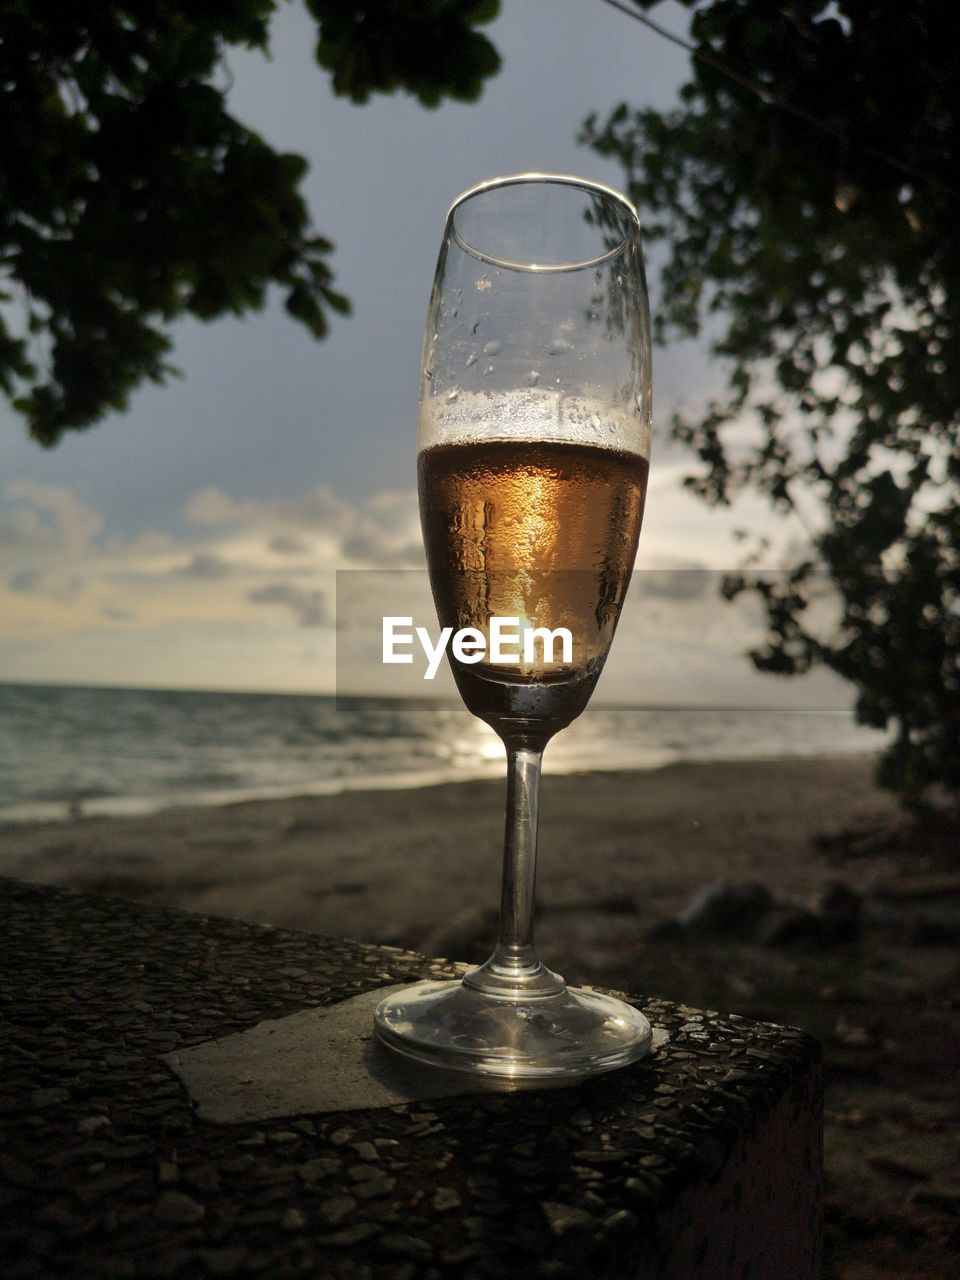 alcohol, glass, refreshment, drink, sky, food and drink, water, nature, drinking glass, sunset, wine, tree, alcoholic beverage, household equipment, land, wine glass, reflection, sea, no people, beach, focus on foreground, outdoors, plant, dusk, freshness, light, close-up, table, champagne, single object, champagne flute, transparent, cloud